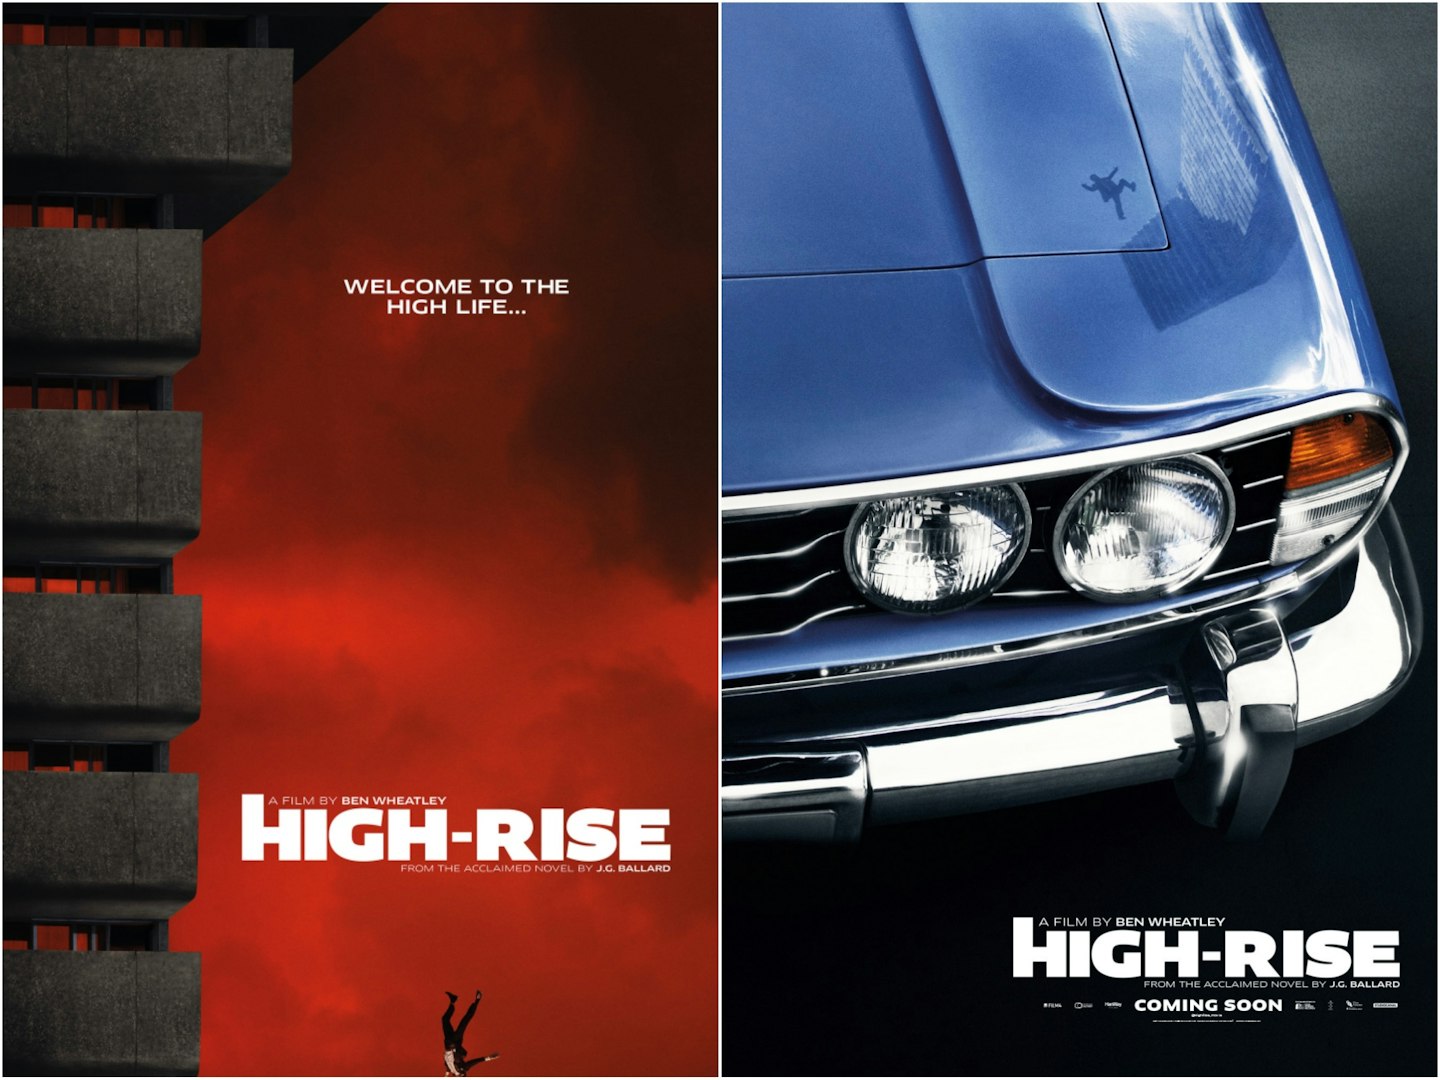 High-Rise posters